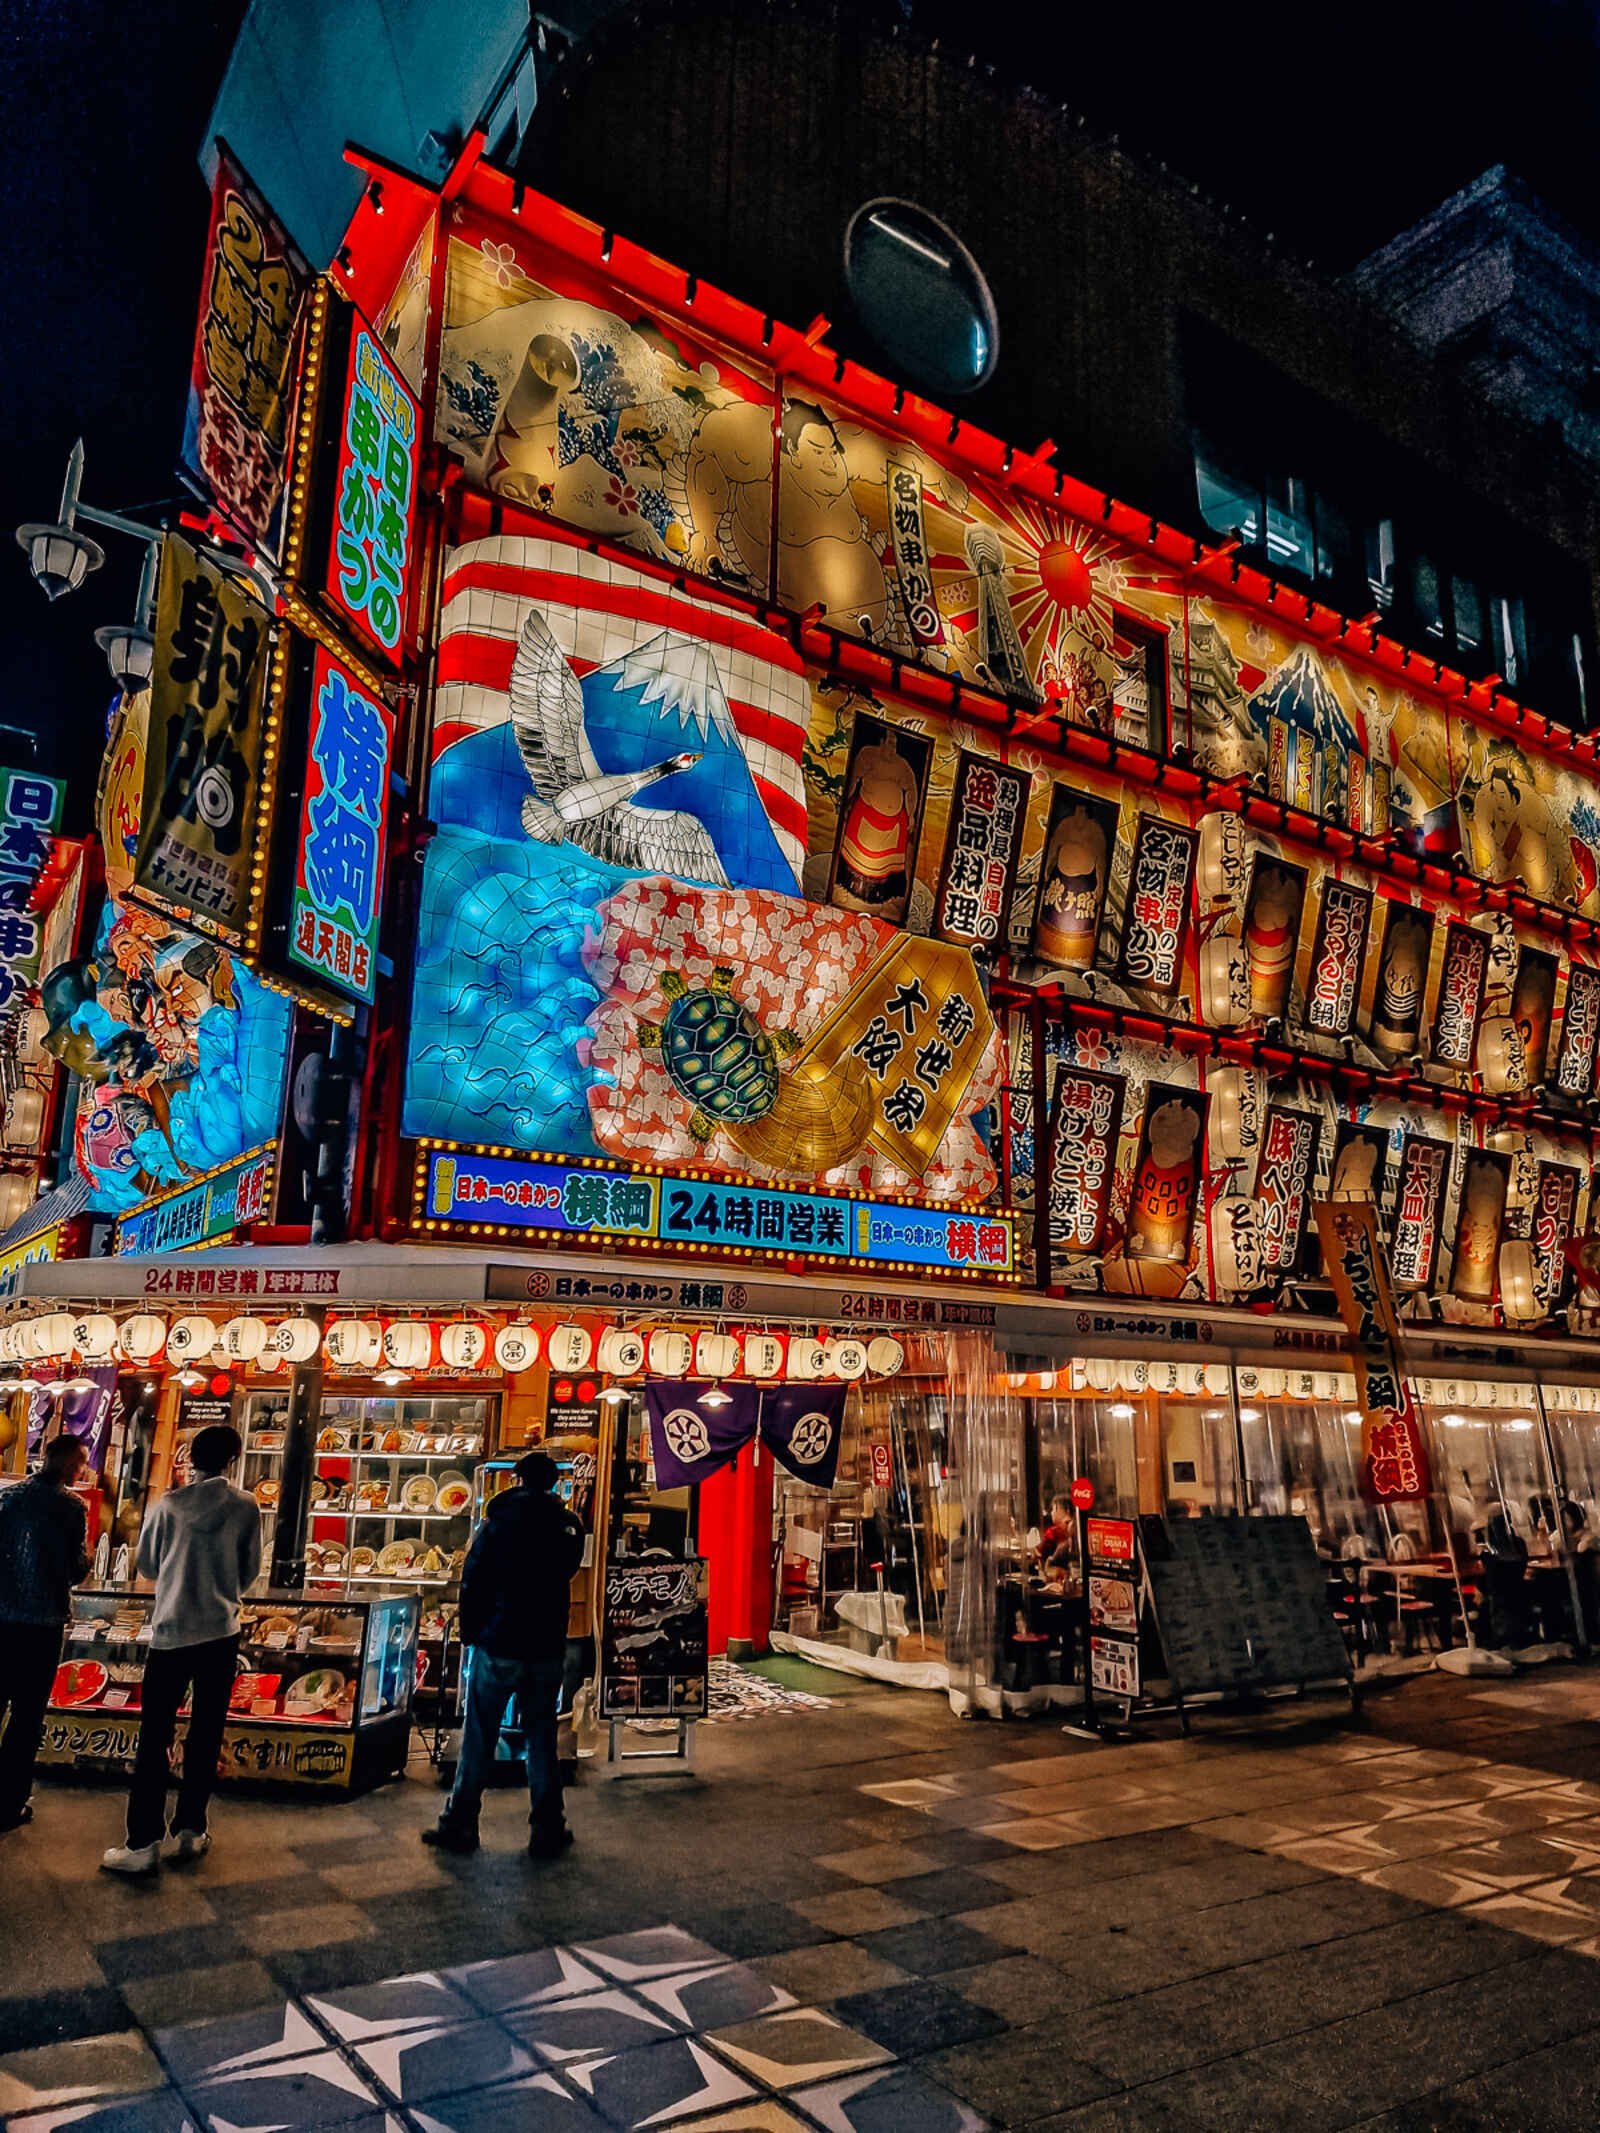 At night time, a building covered in rectangular Japanese signs and lit up with a big picture of mount fuji and an eagle. Small lanterns line the entrance with people milling around in front